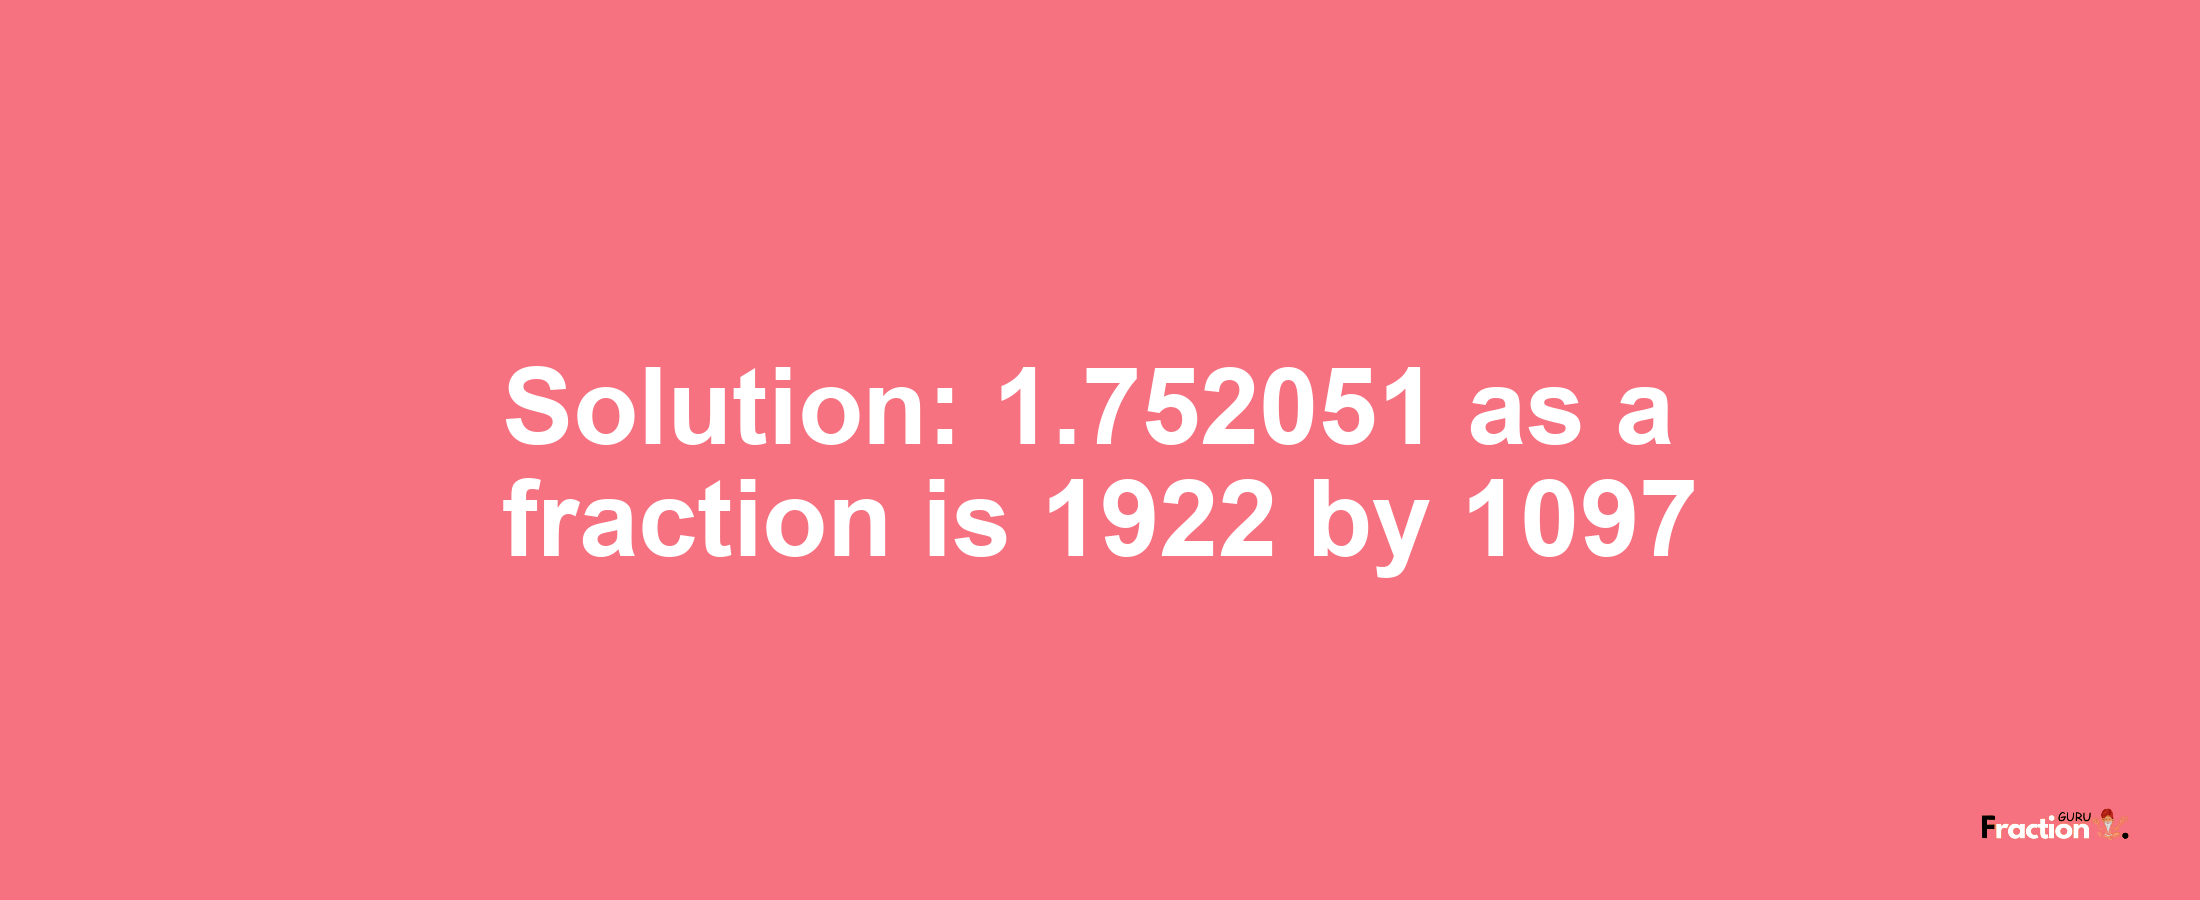 Solution:1.752051 as a fraction is 1922/1097